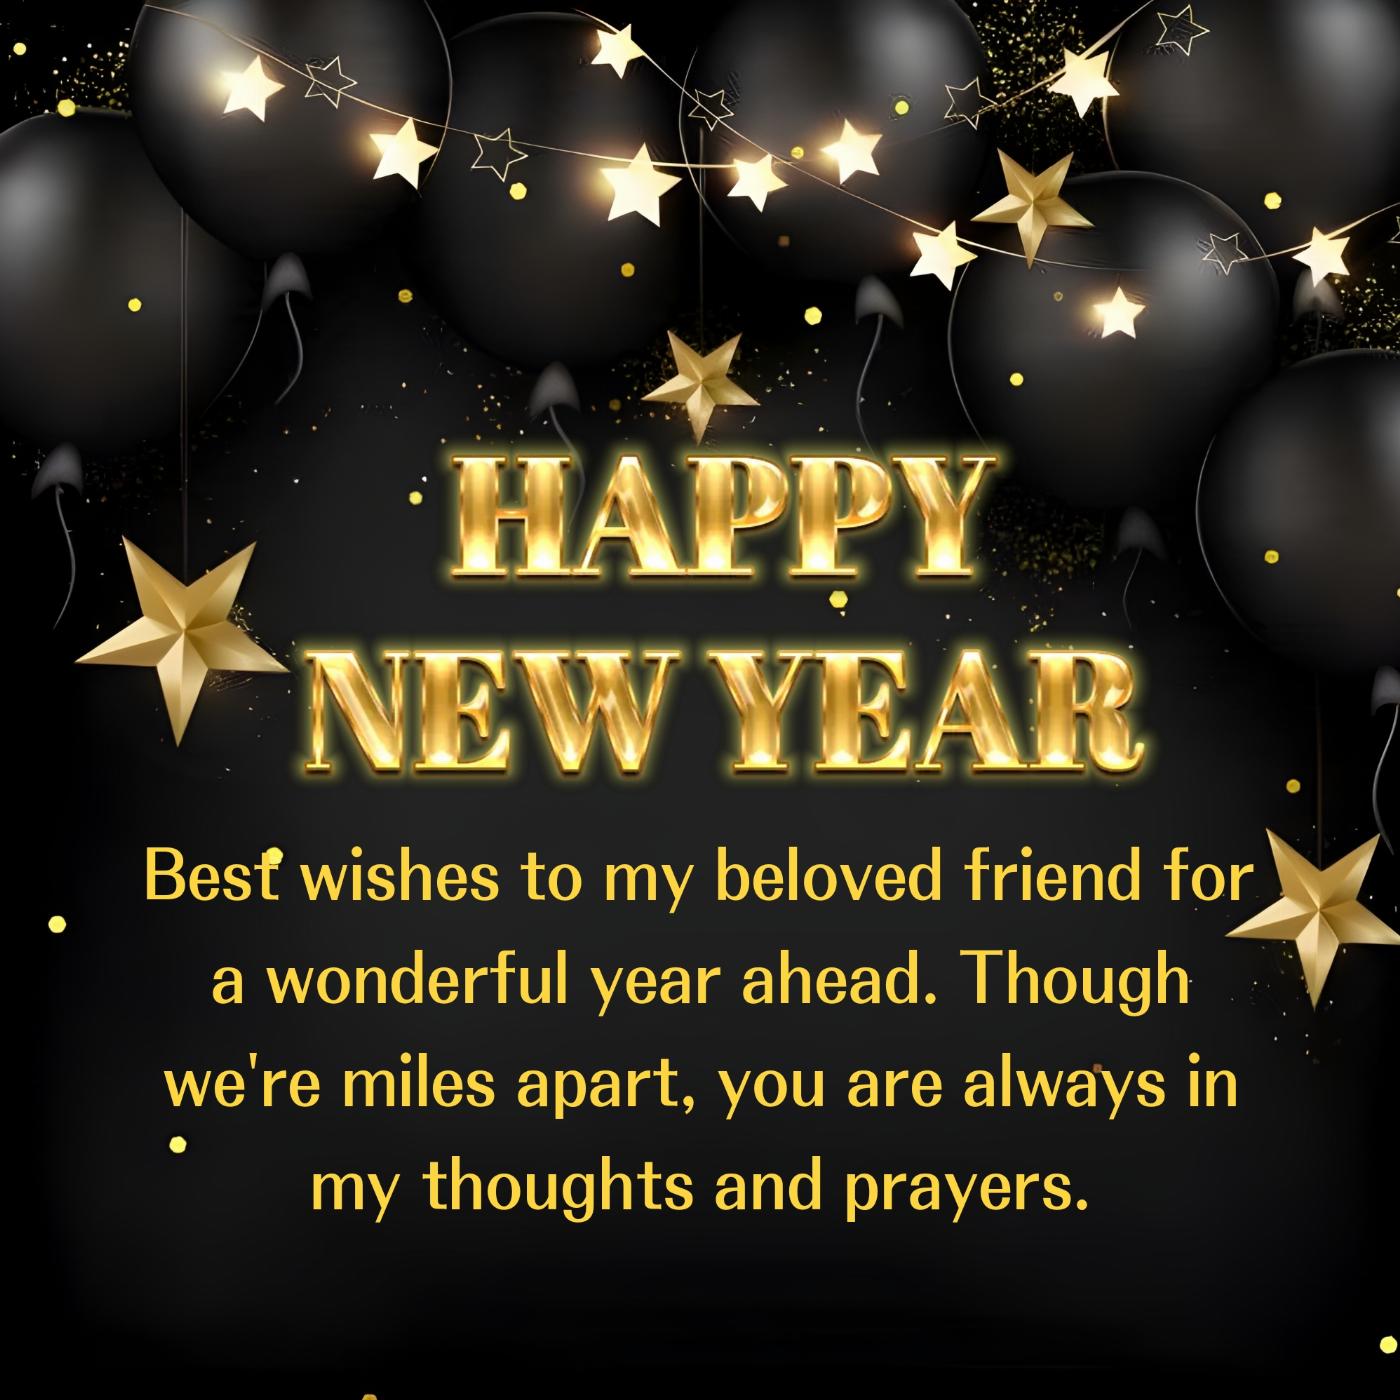 Best wishes to my beloved friend for a wonderful year ahead